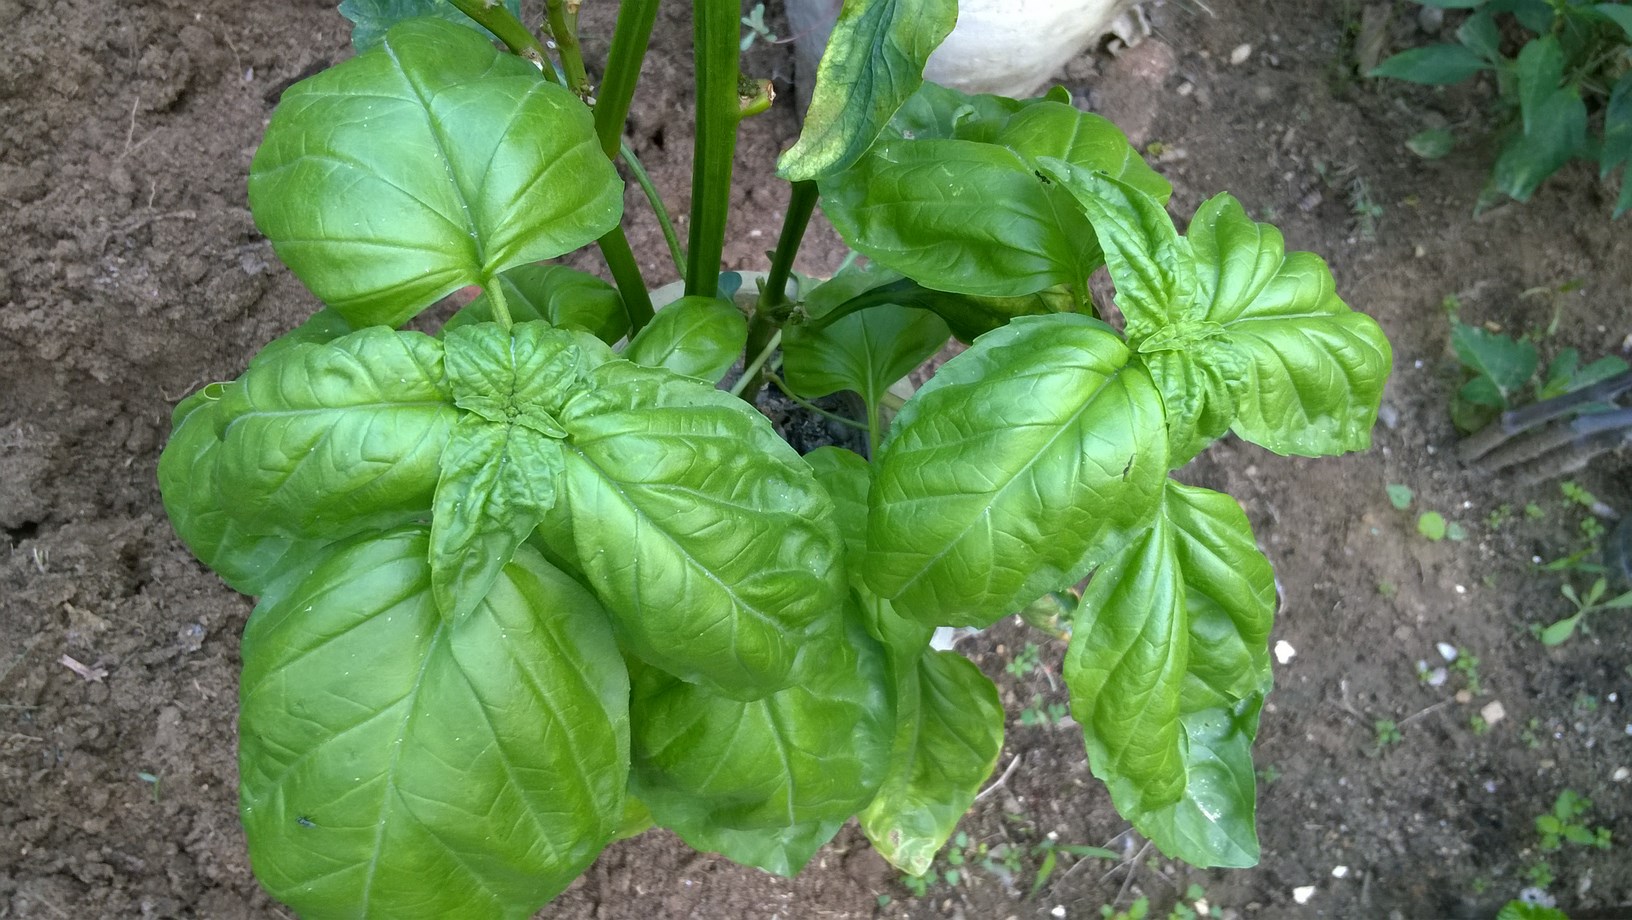 Basil is a deliciously fragrant, quick growing aromatic herb.